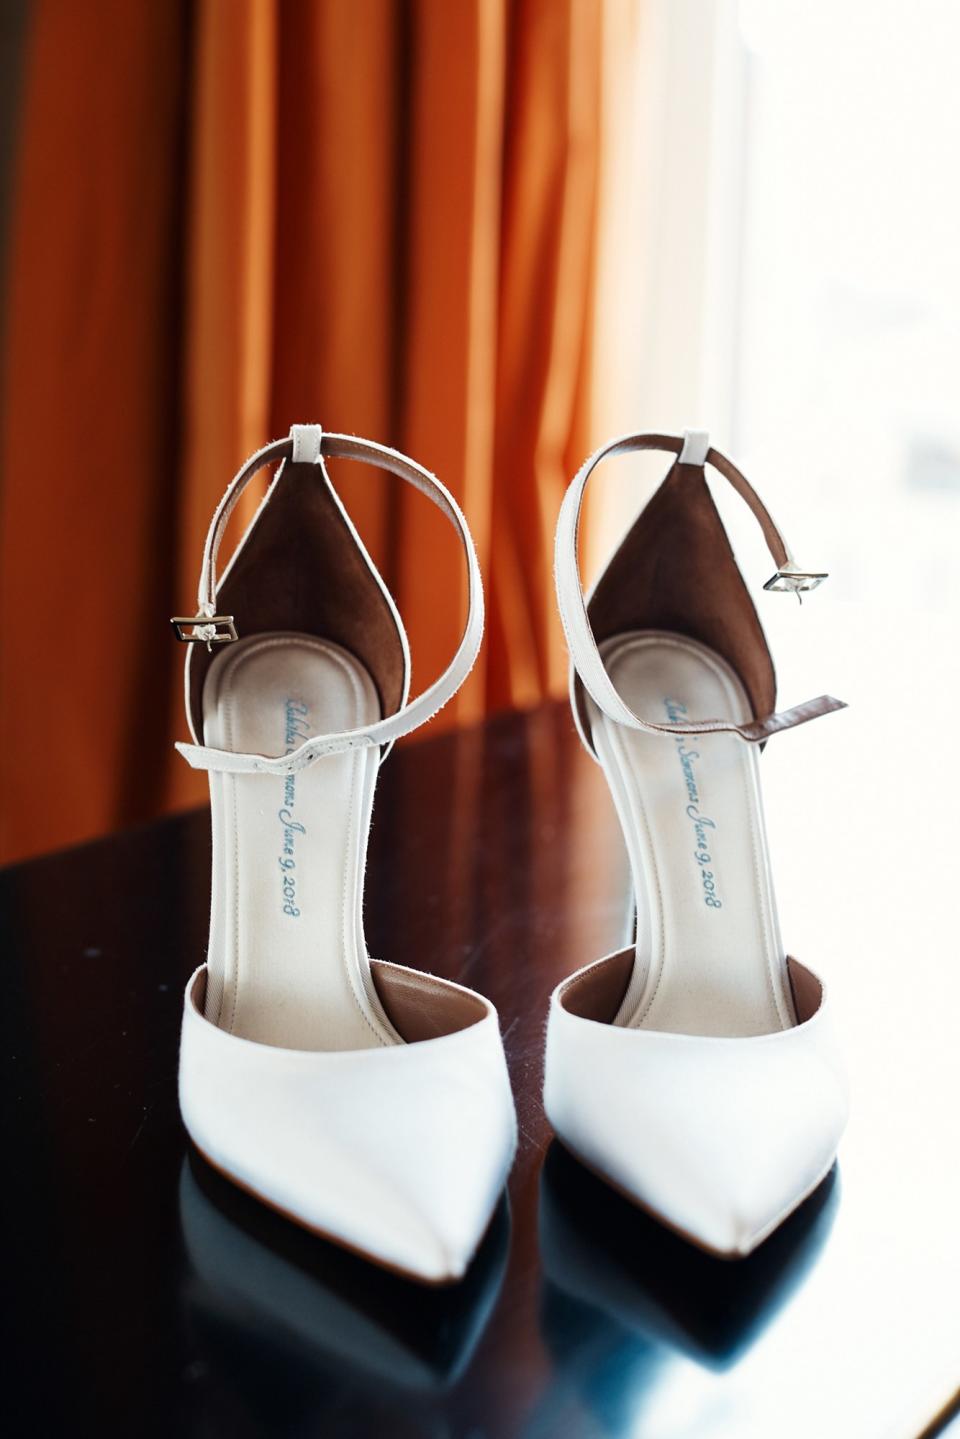 I wore my favorite Alhambra shoes, from my bridal collection. I had my name and the date of my wedding embroidered in the sole as my “something blue.” I have been doing this for my friends for years and we recently started offering the custom bridal shoes on our website.